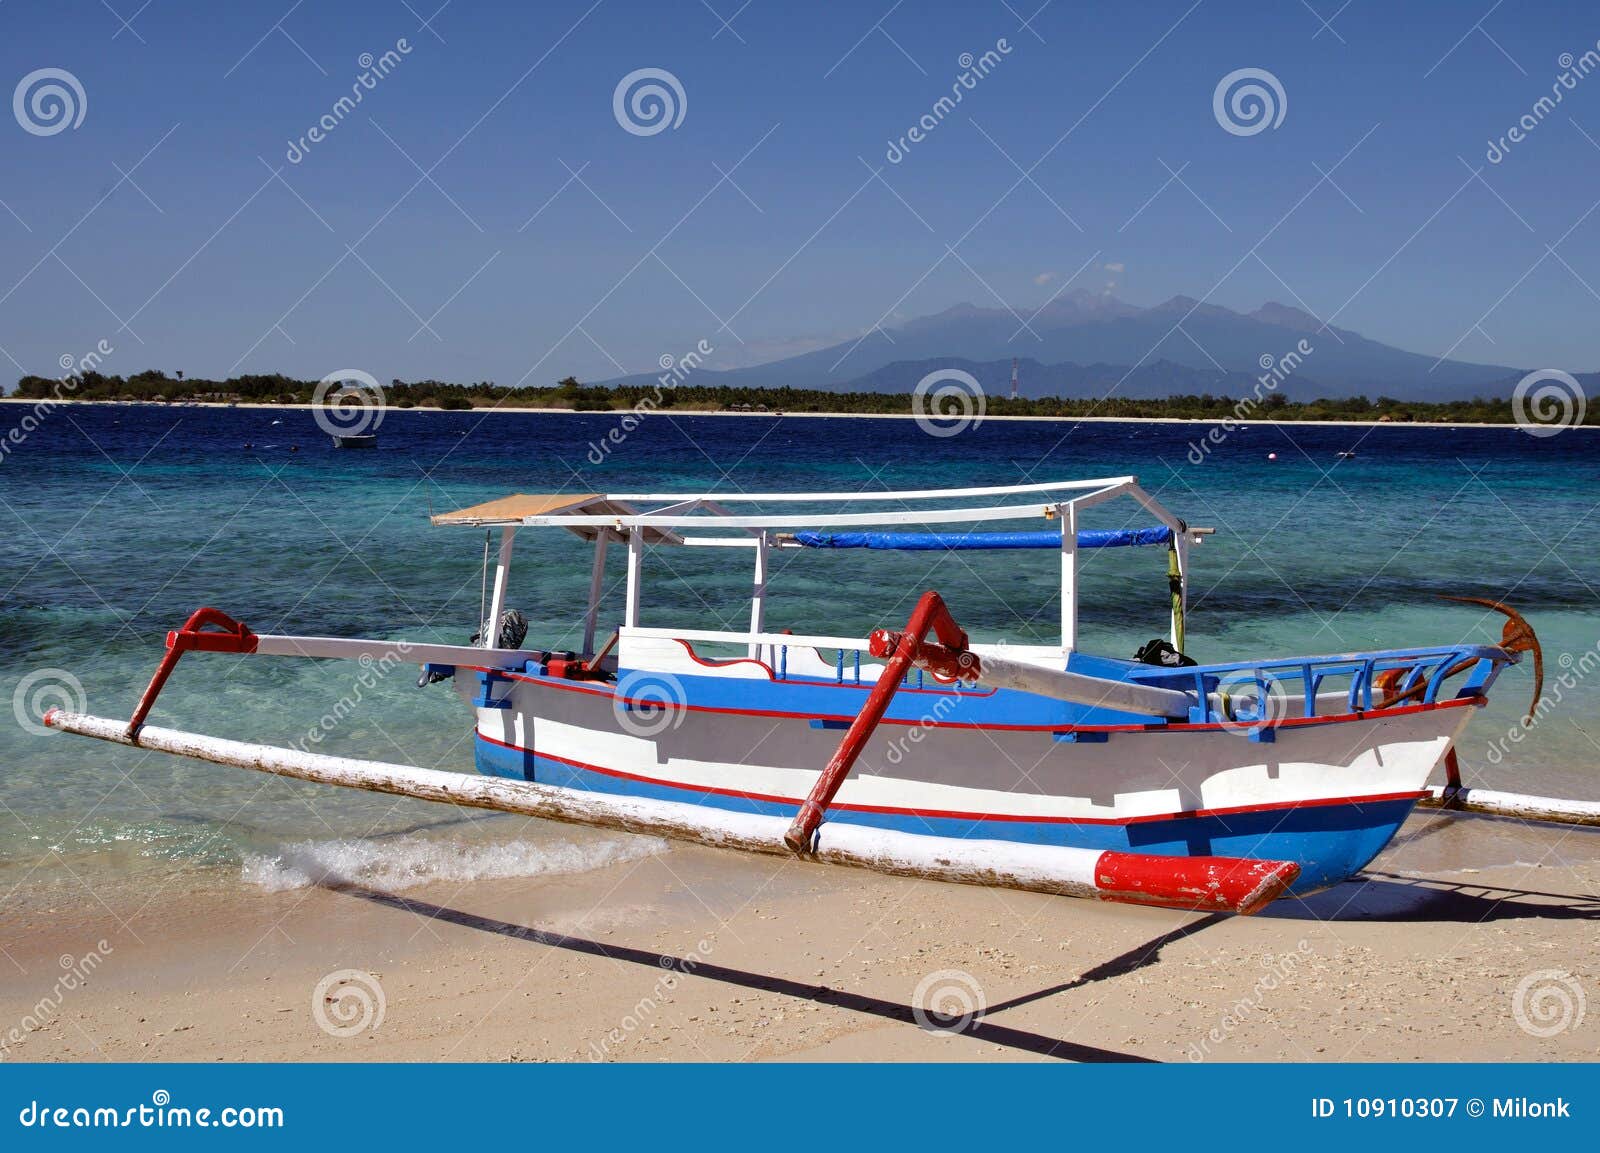 Indonesian Boat Royalty Free Stock Photography - Image: 10910307